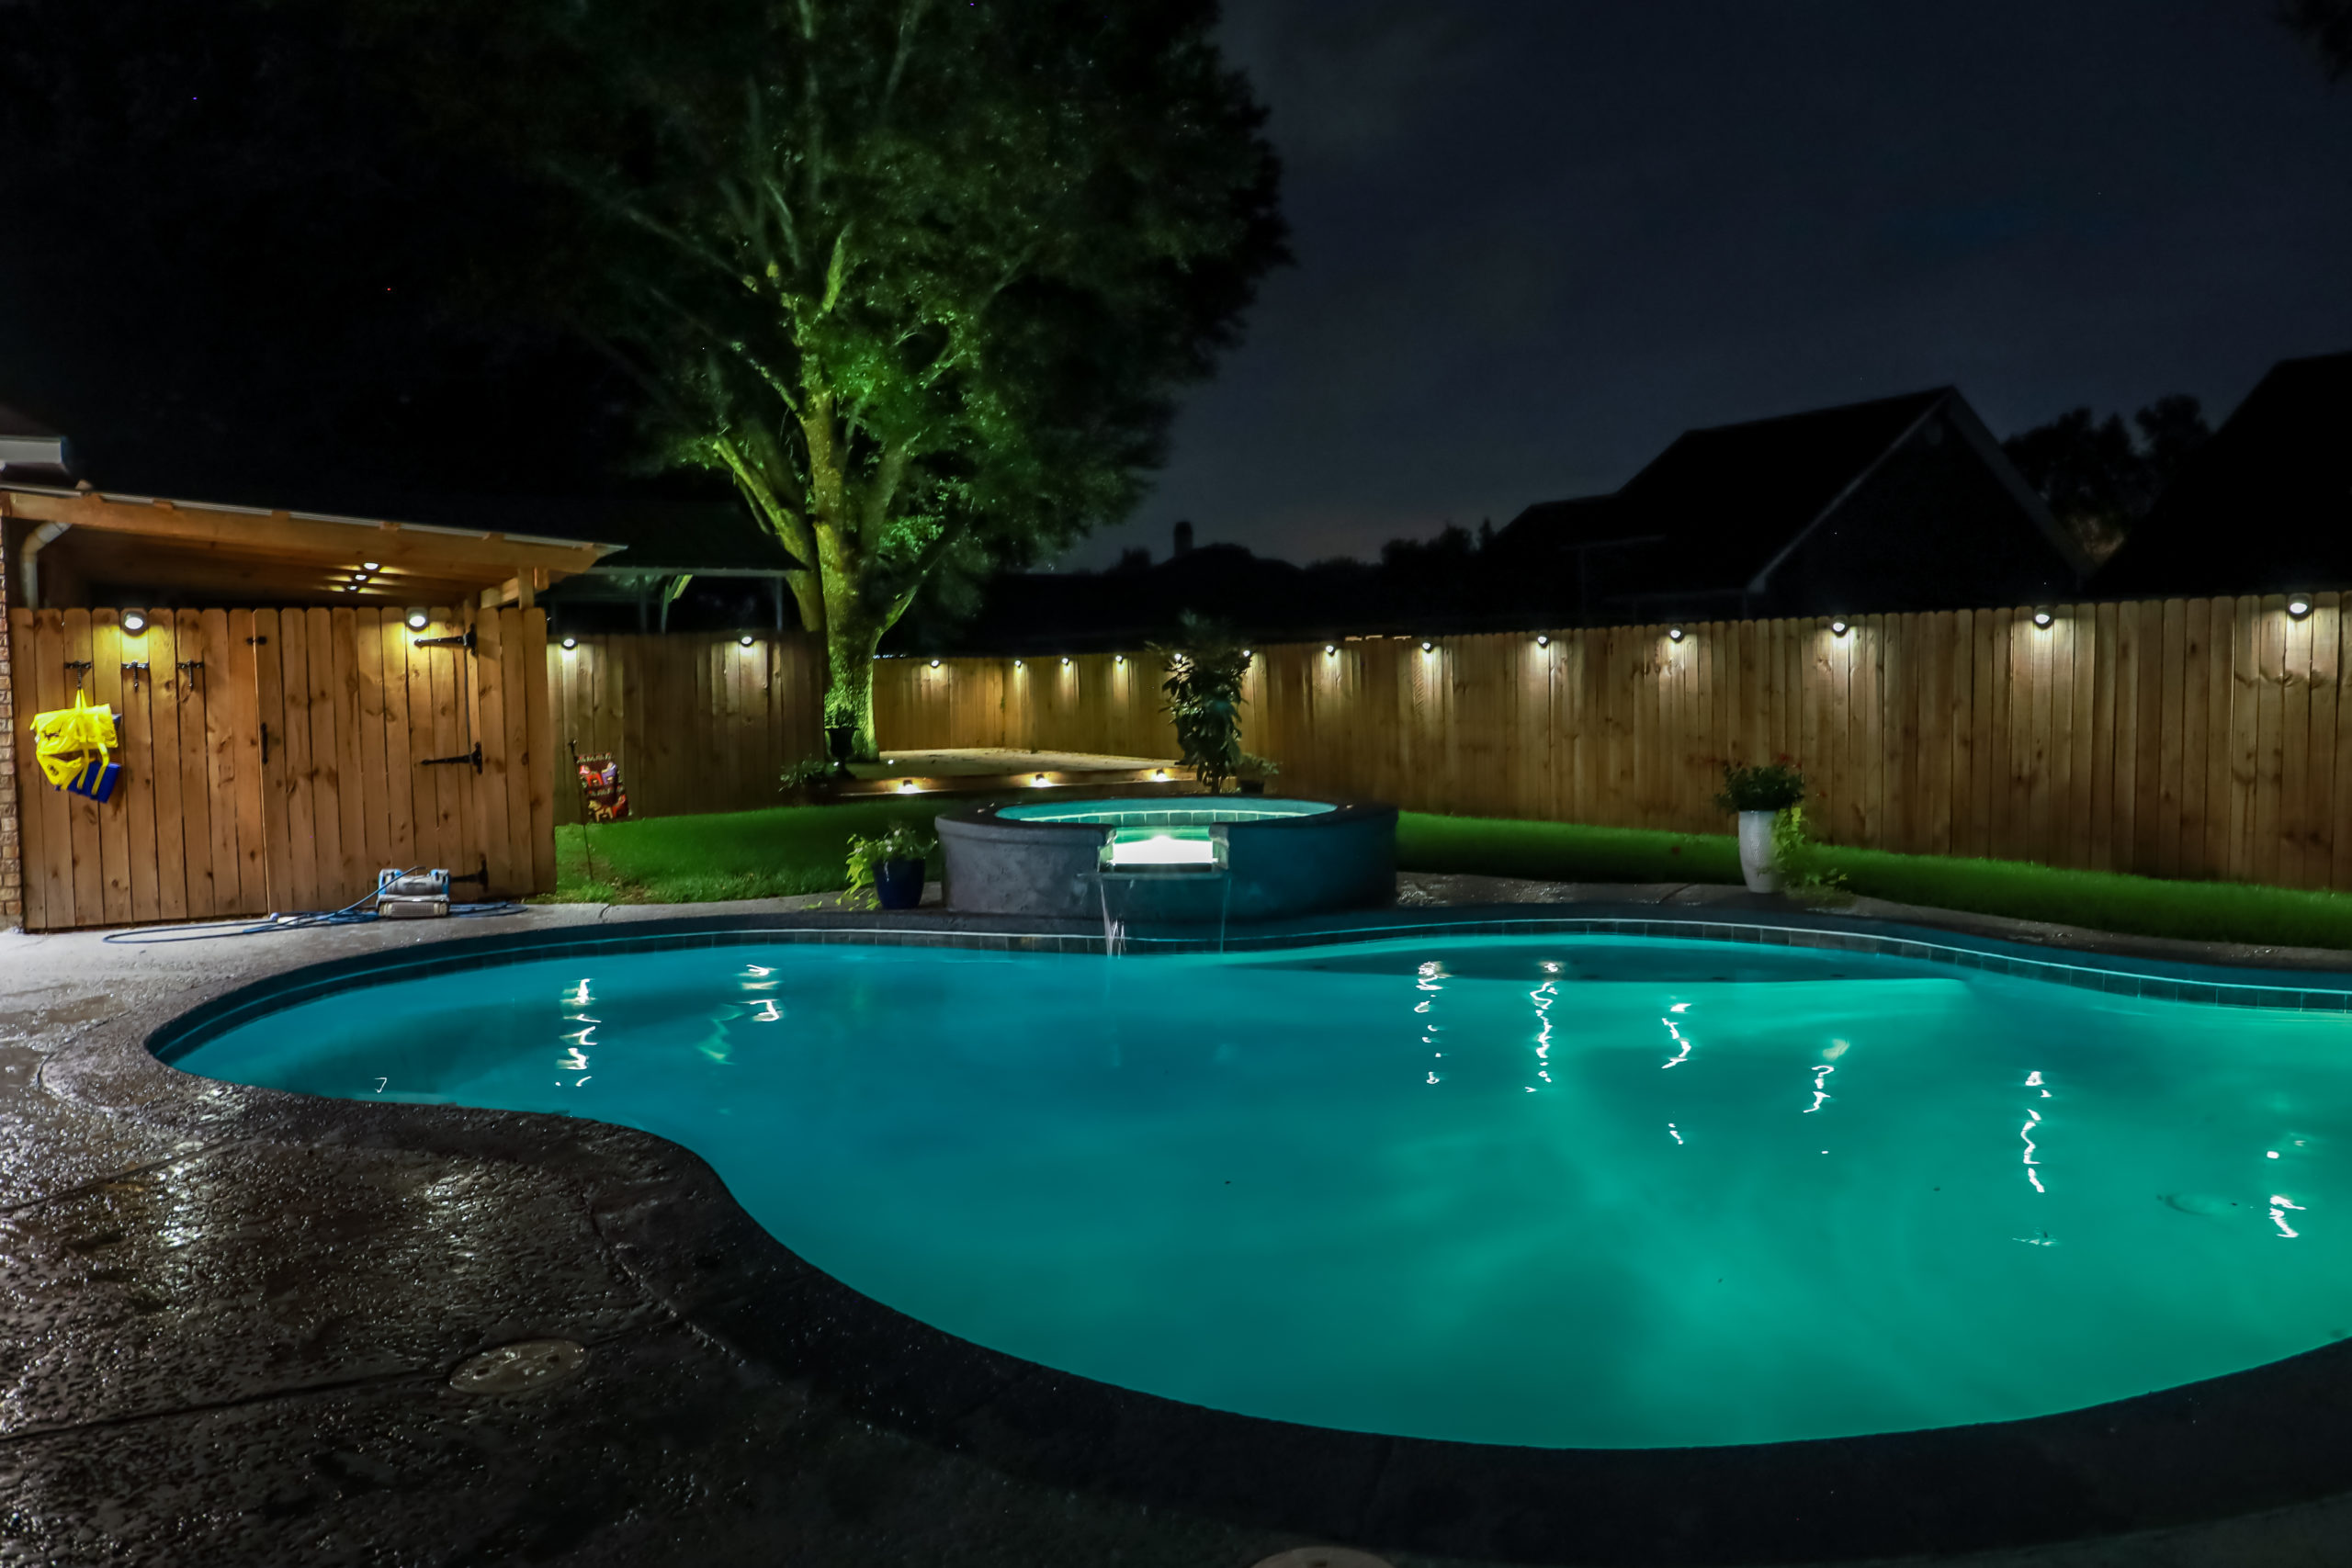 A nighttime pool illuminated by a beautiful array of lights, creating a magical and enchanting atmosphere with reflections dancing on the water's surface.